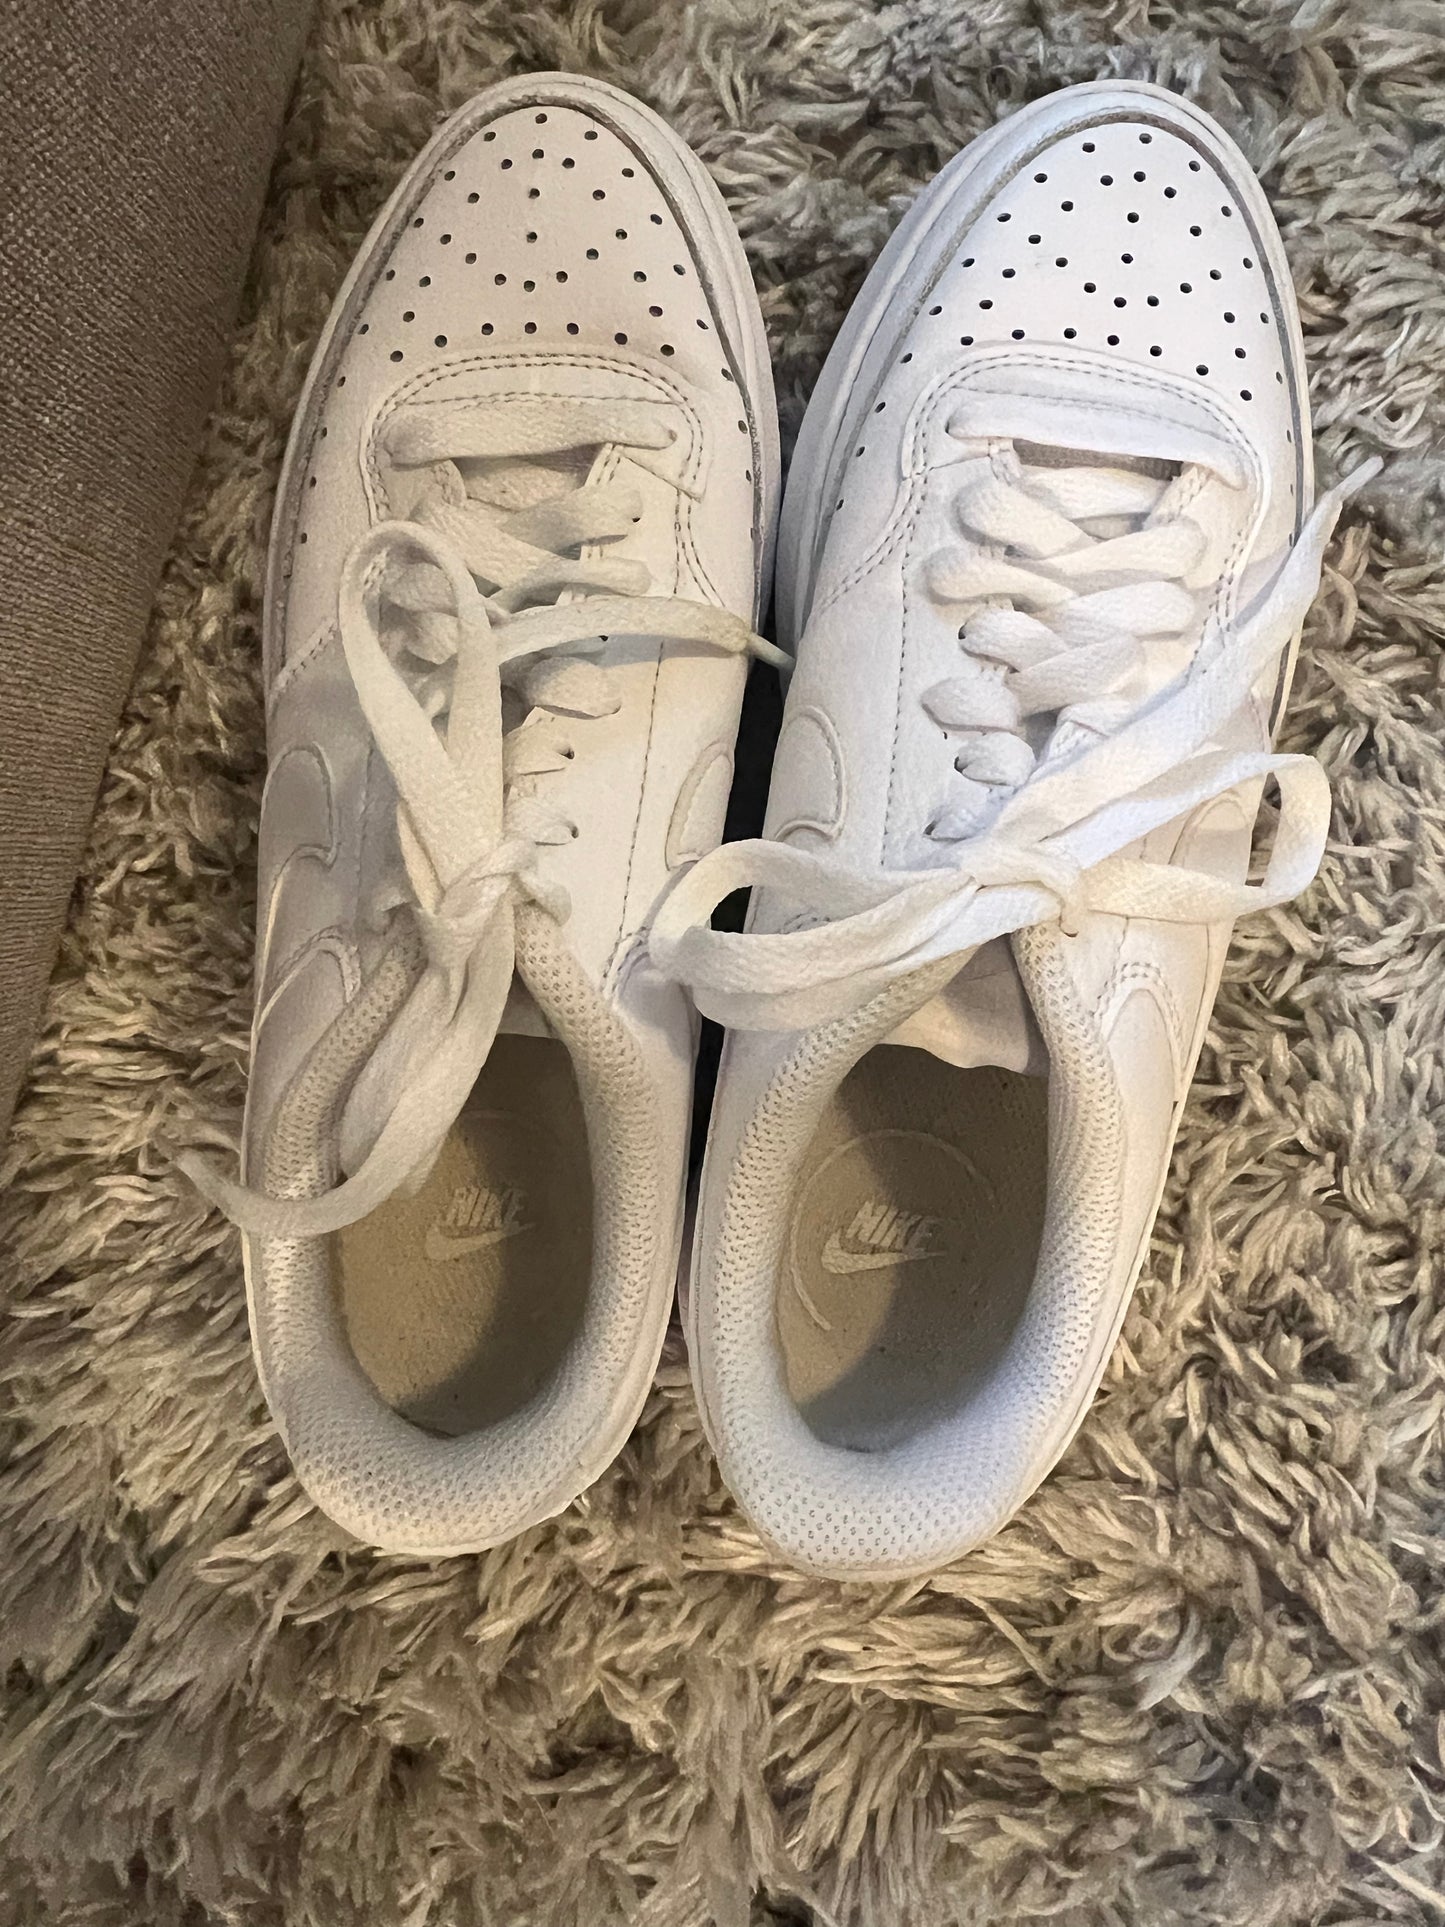 Nike White Low Top Platform Lace Up Sneakers Size 7 EUC PPU 45208 or Spring Sale